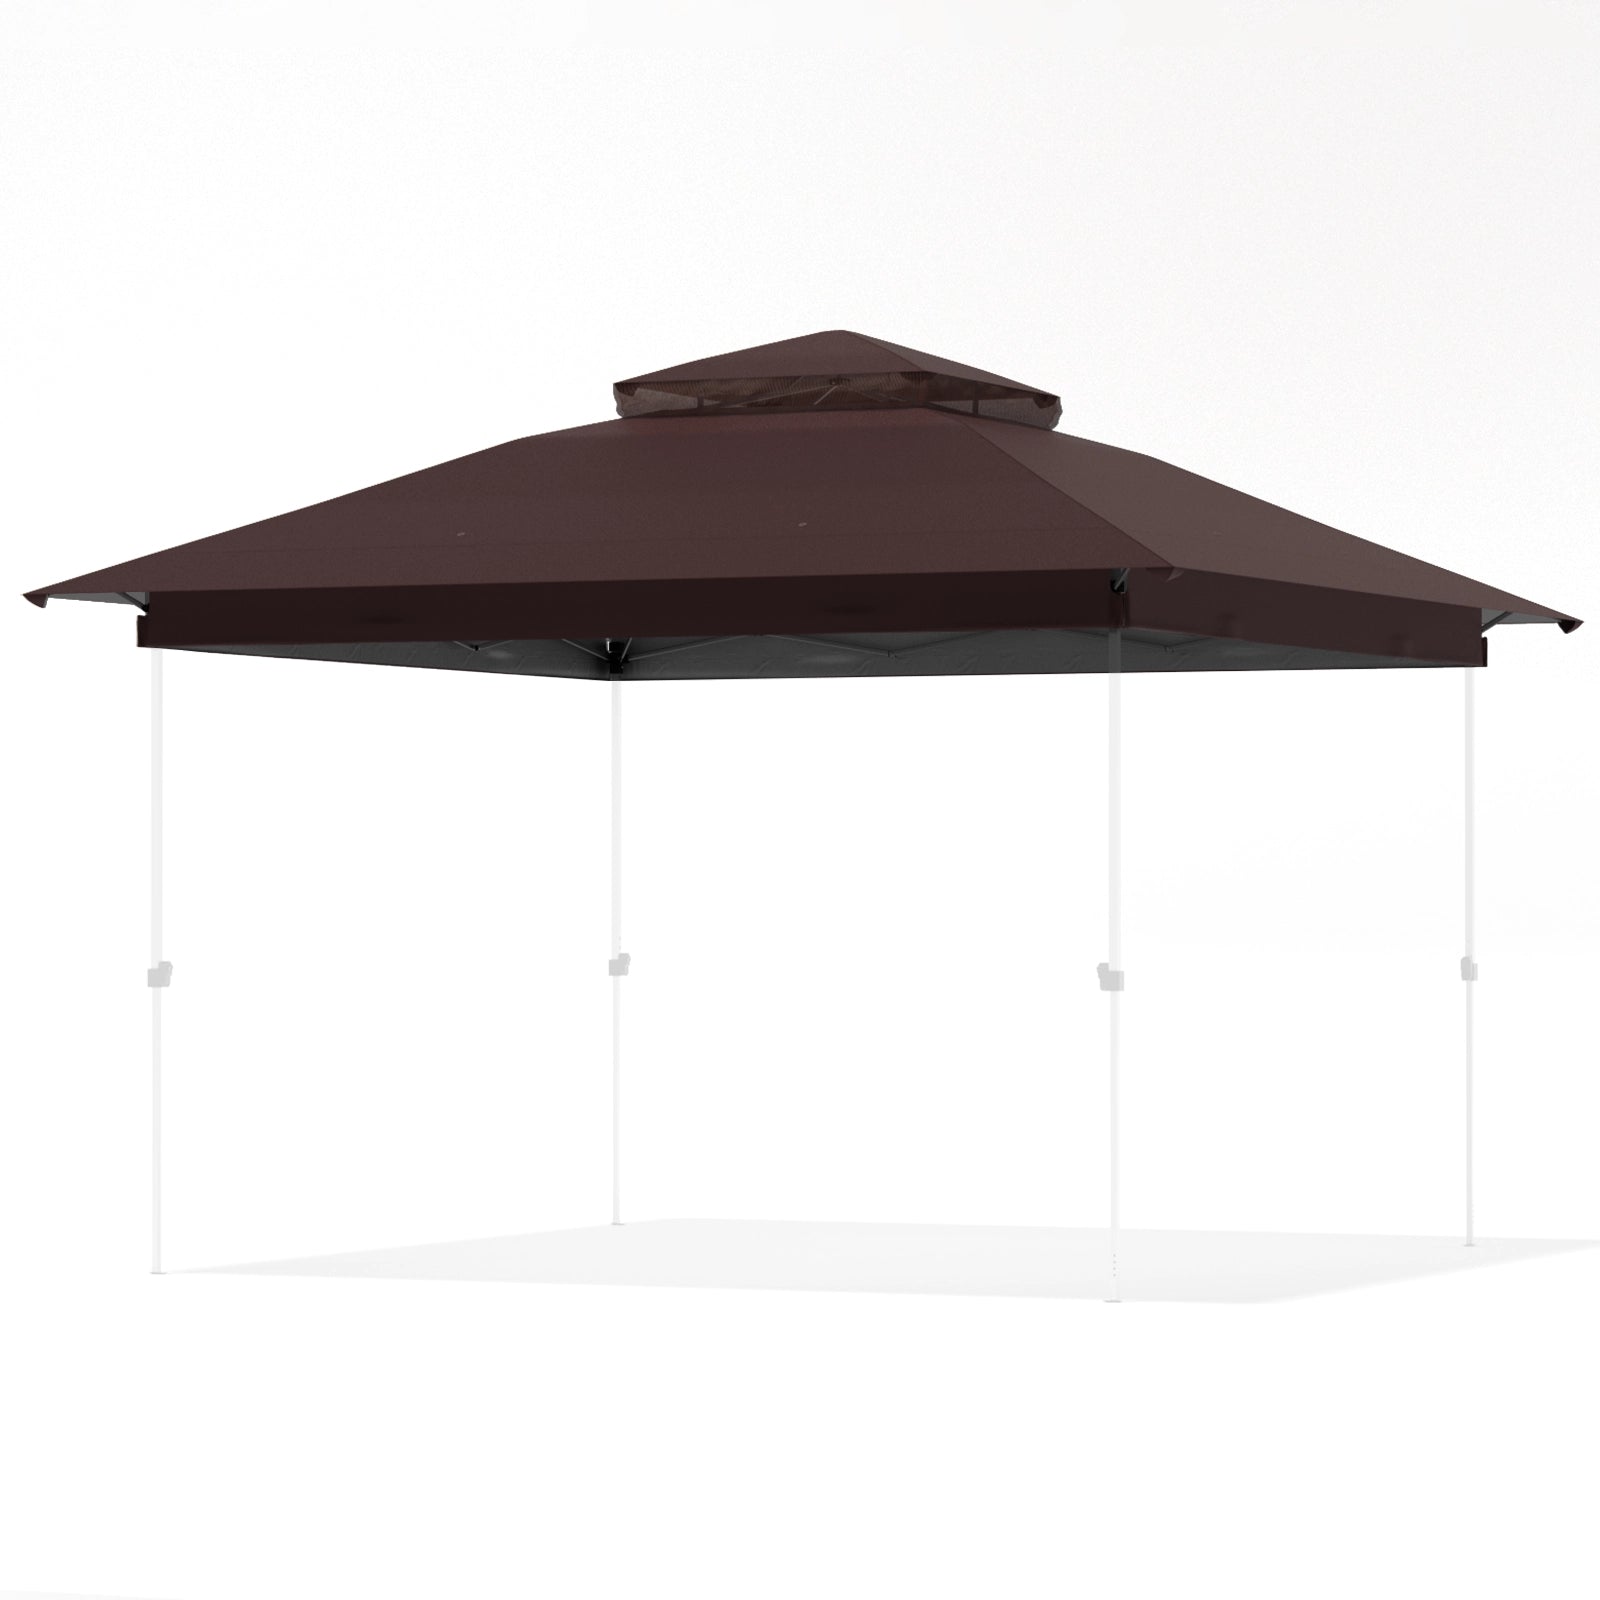 FUNG YARD 11' x 11' Outdoor Pop-up Gazebo Replacement Canopy